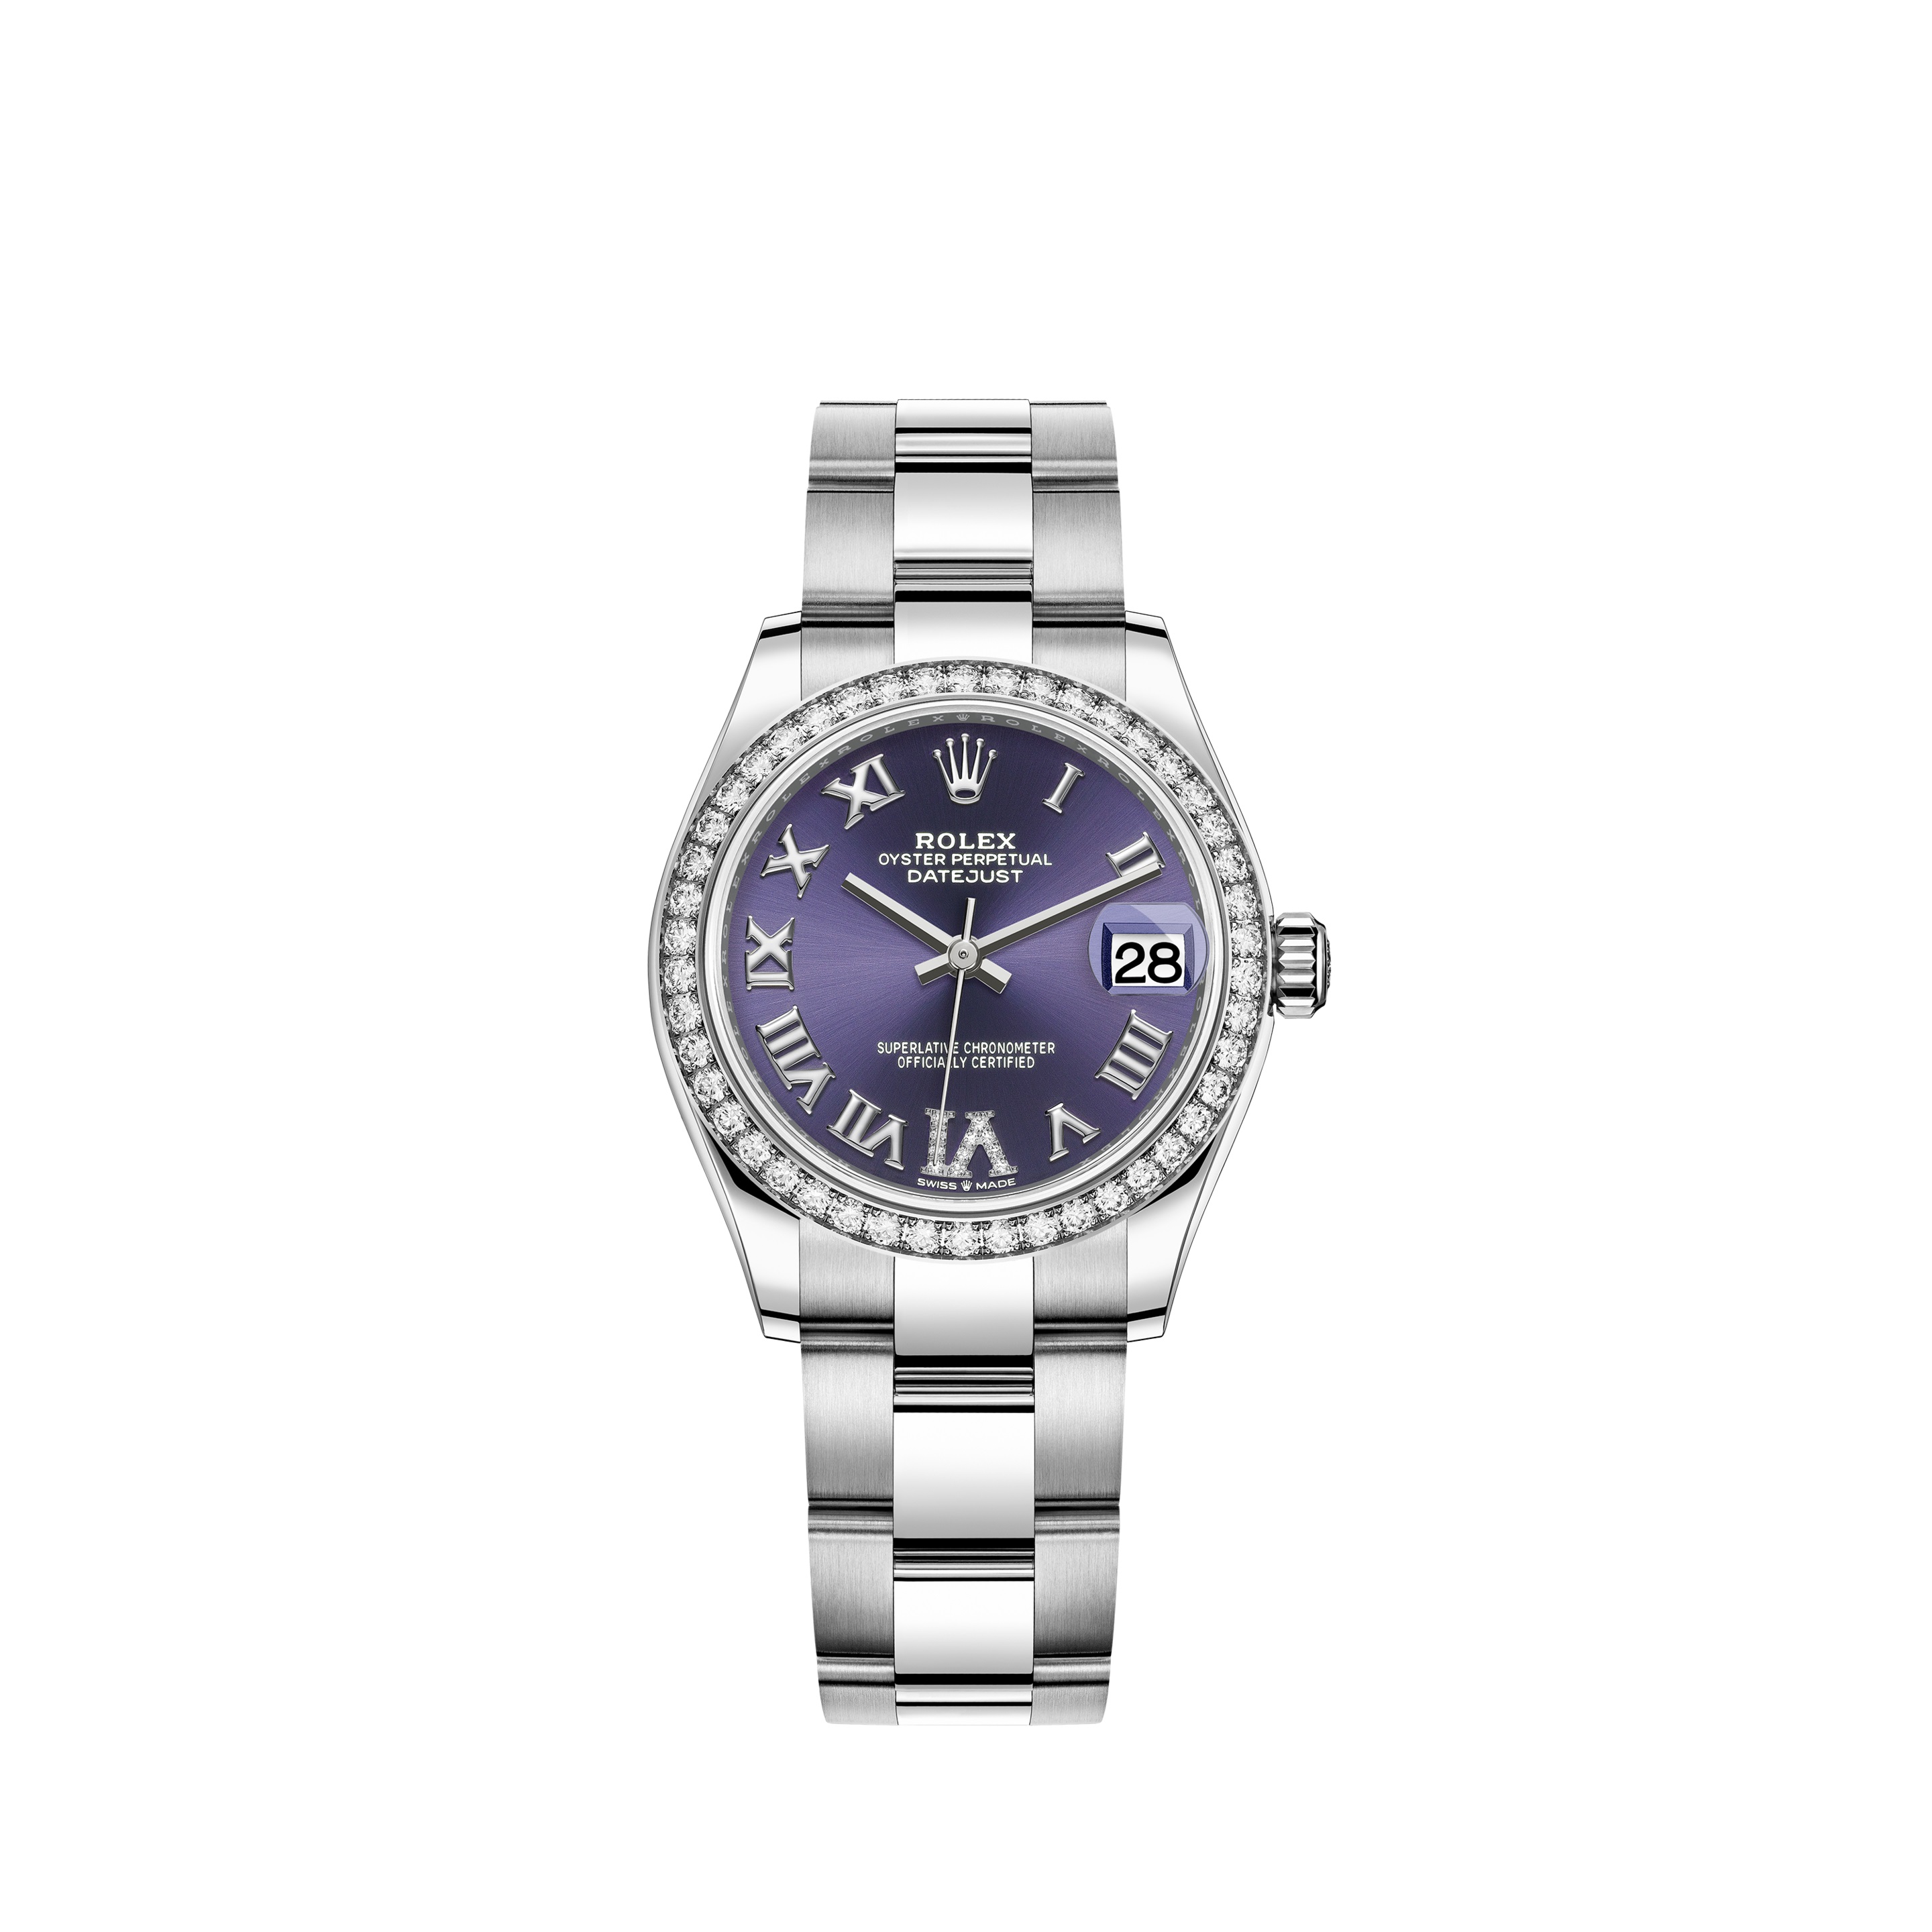 Datejust 31 278384RBR White Gold & Stainless Steel Watch (Aubergine Set with Diamonds) - Click Image to Close